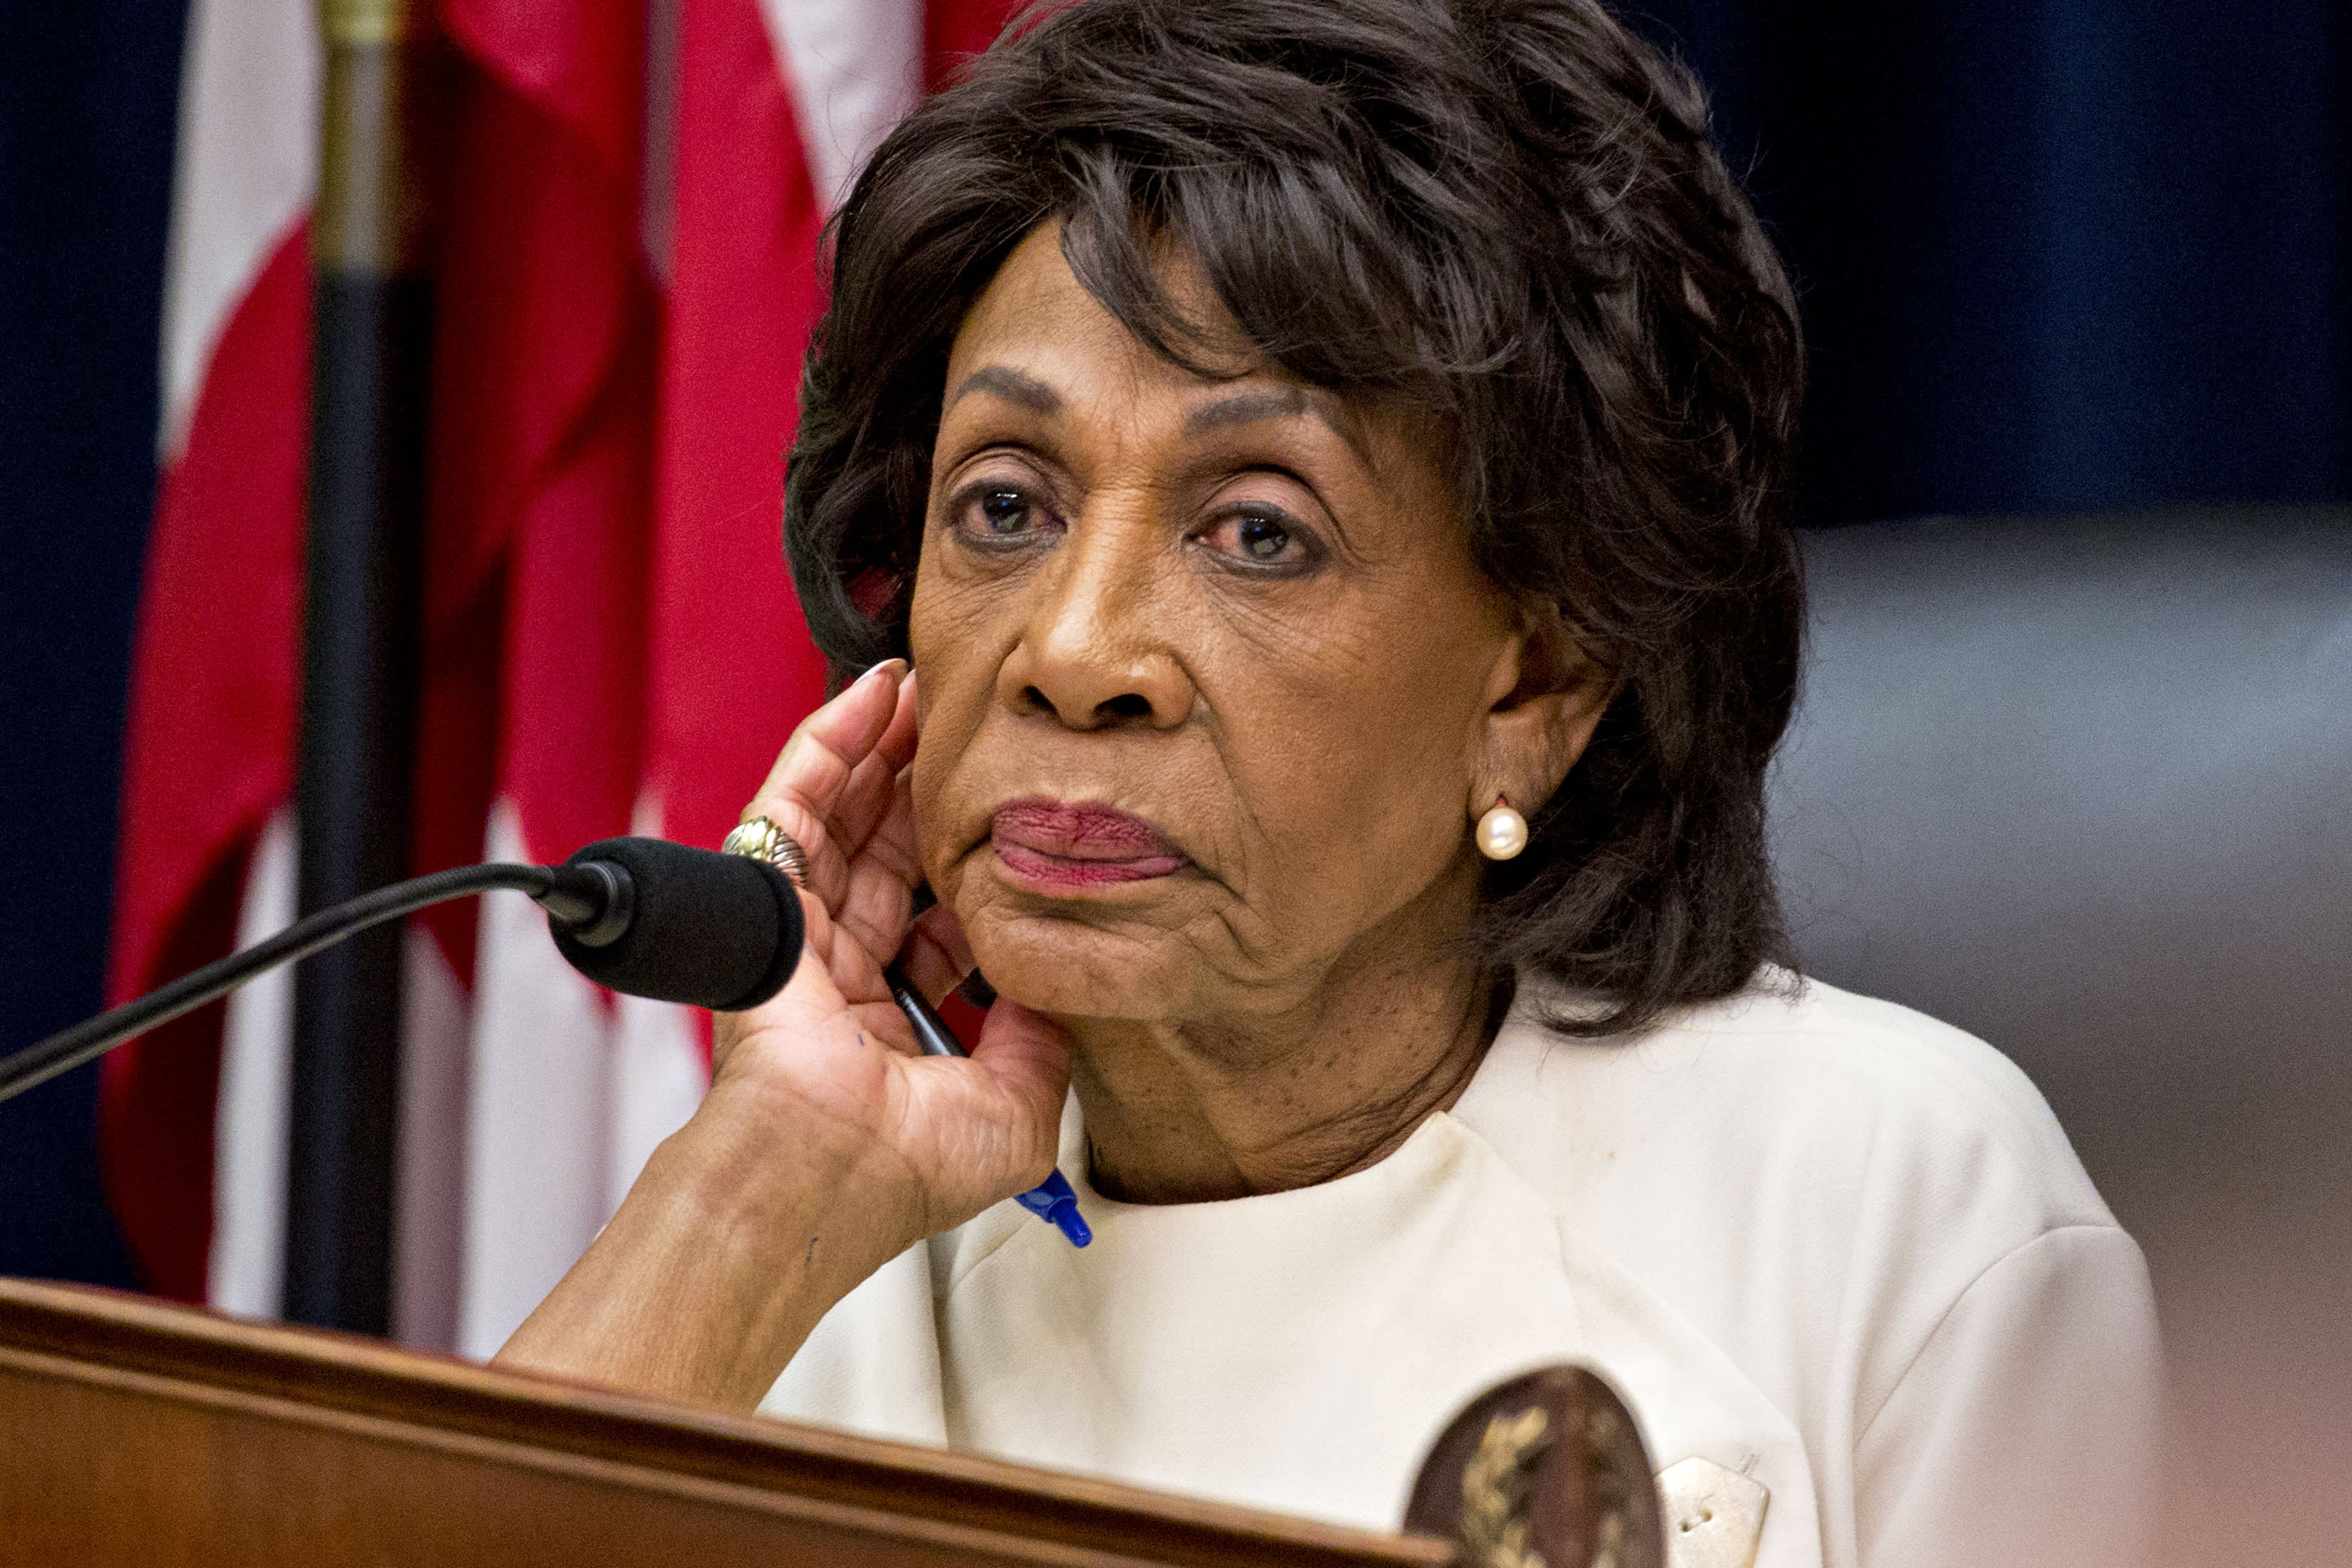 Congress will move 'aggressively' to examine Facebook's cryptocurrency, Rep. Maxine Waters says